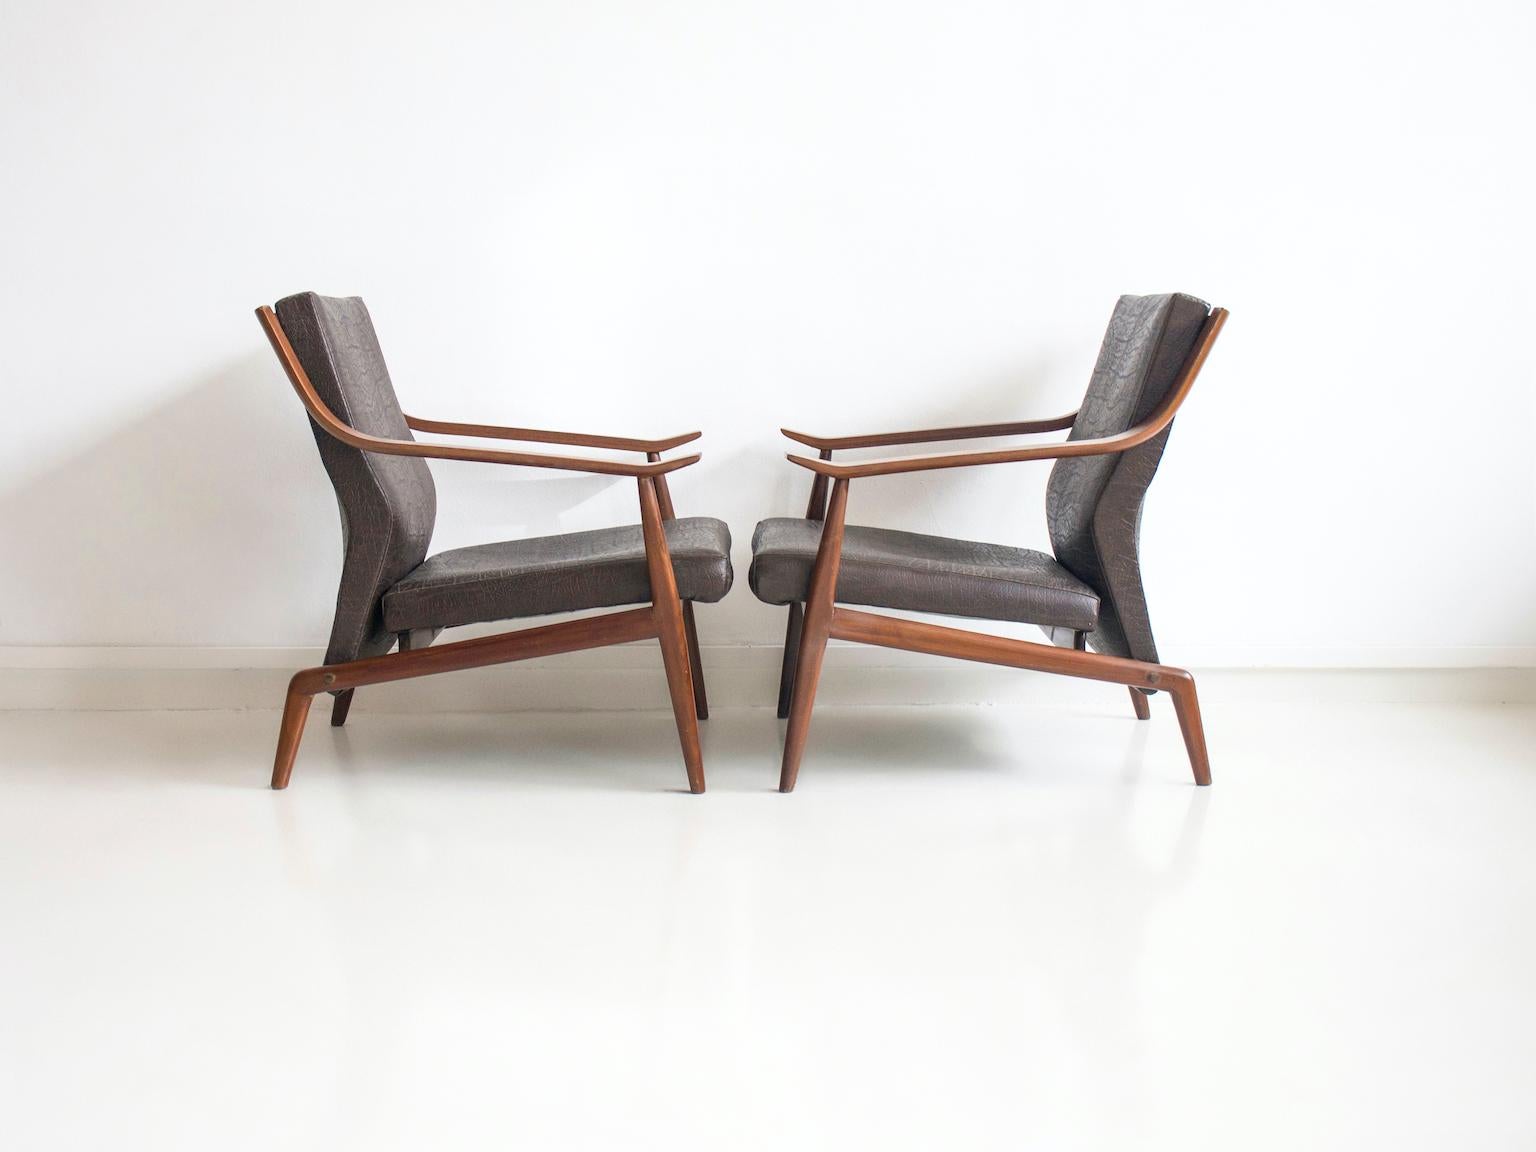 20th Century Pair of Italian Wooden Armchairs with Brown Faux Leather Upholstery